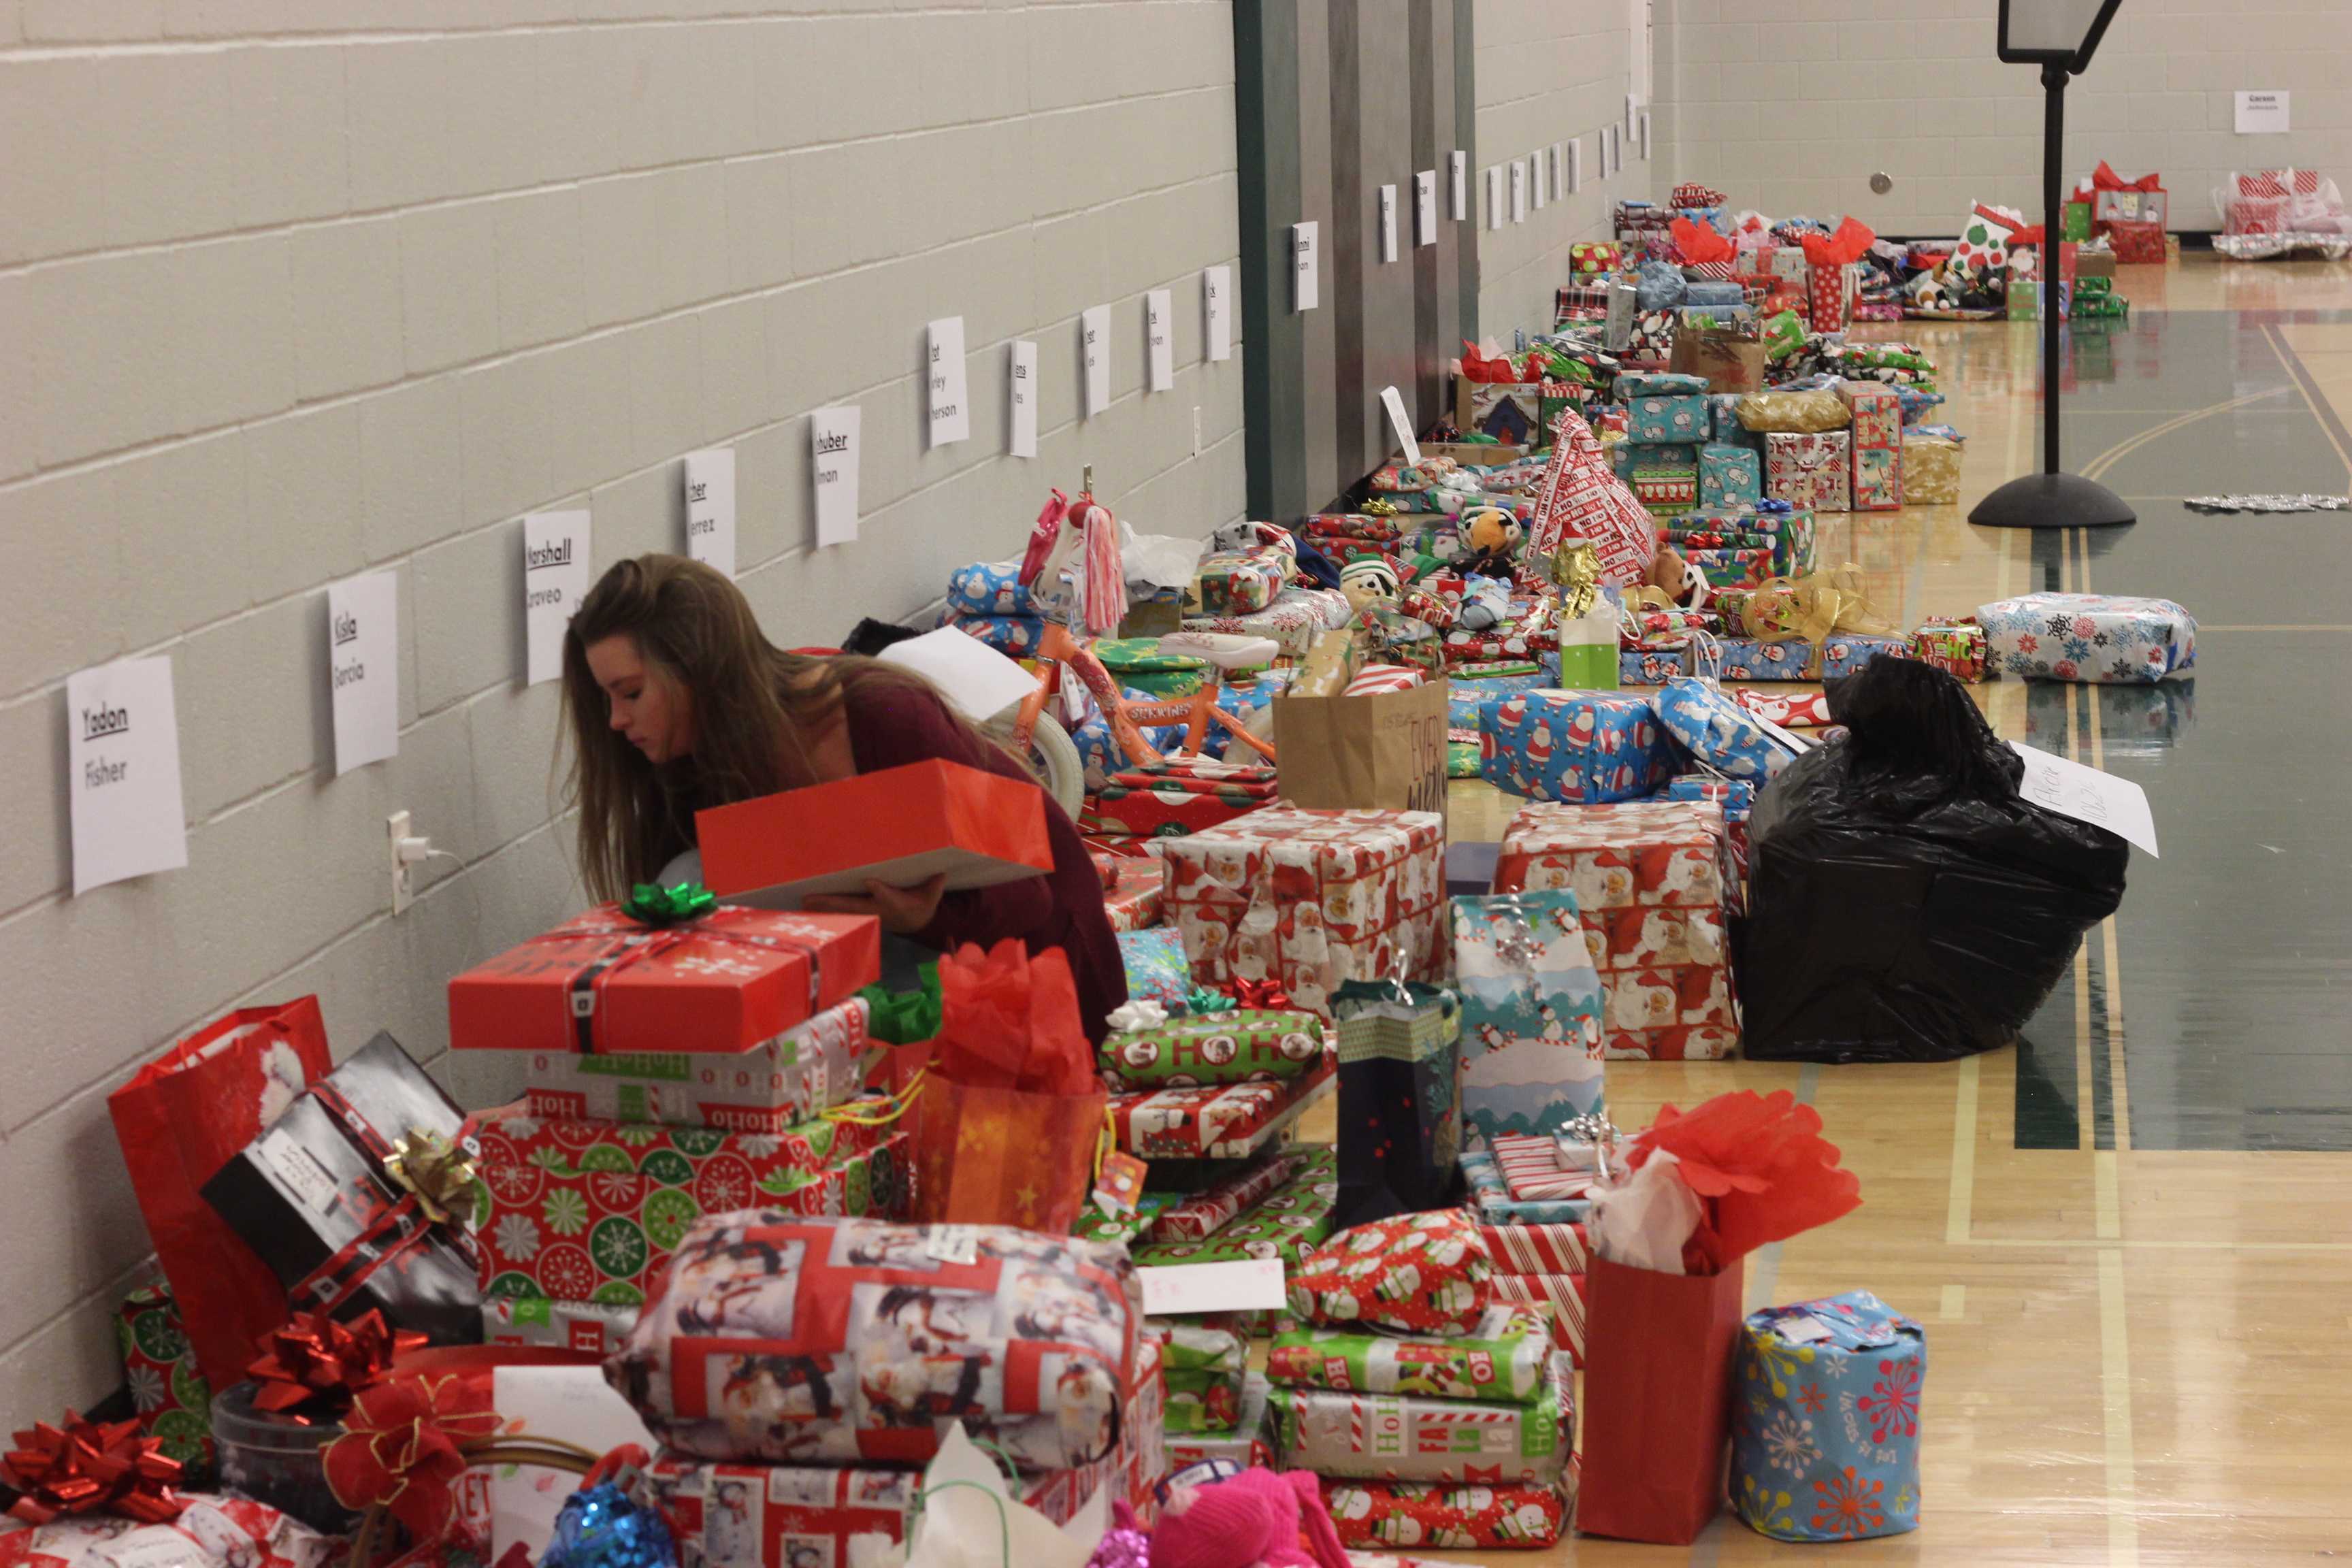 Piles of neatly wrapped gifts surrounded the gym, each dedicated lovingly from advisory to family.
Photo Credit: Cami Corp